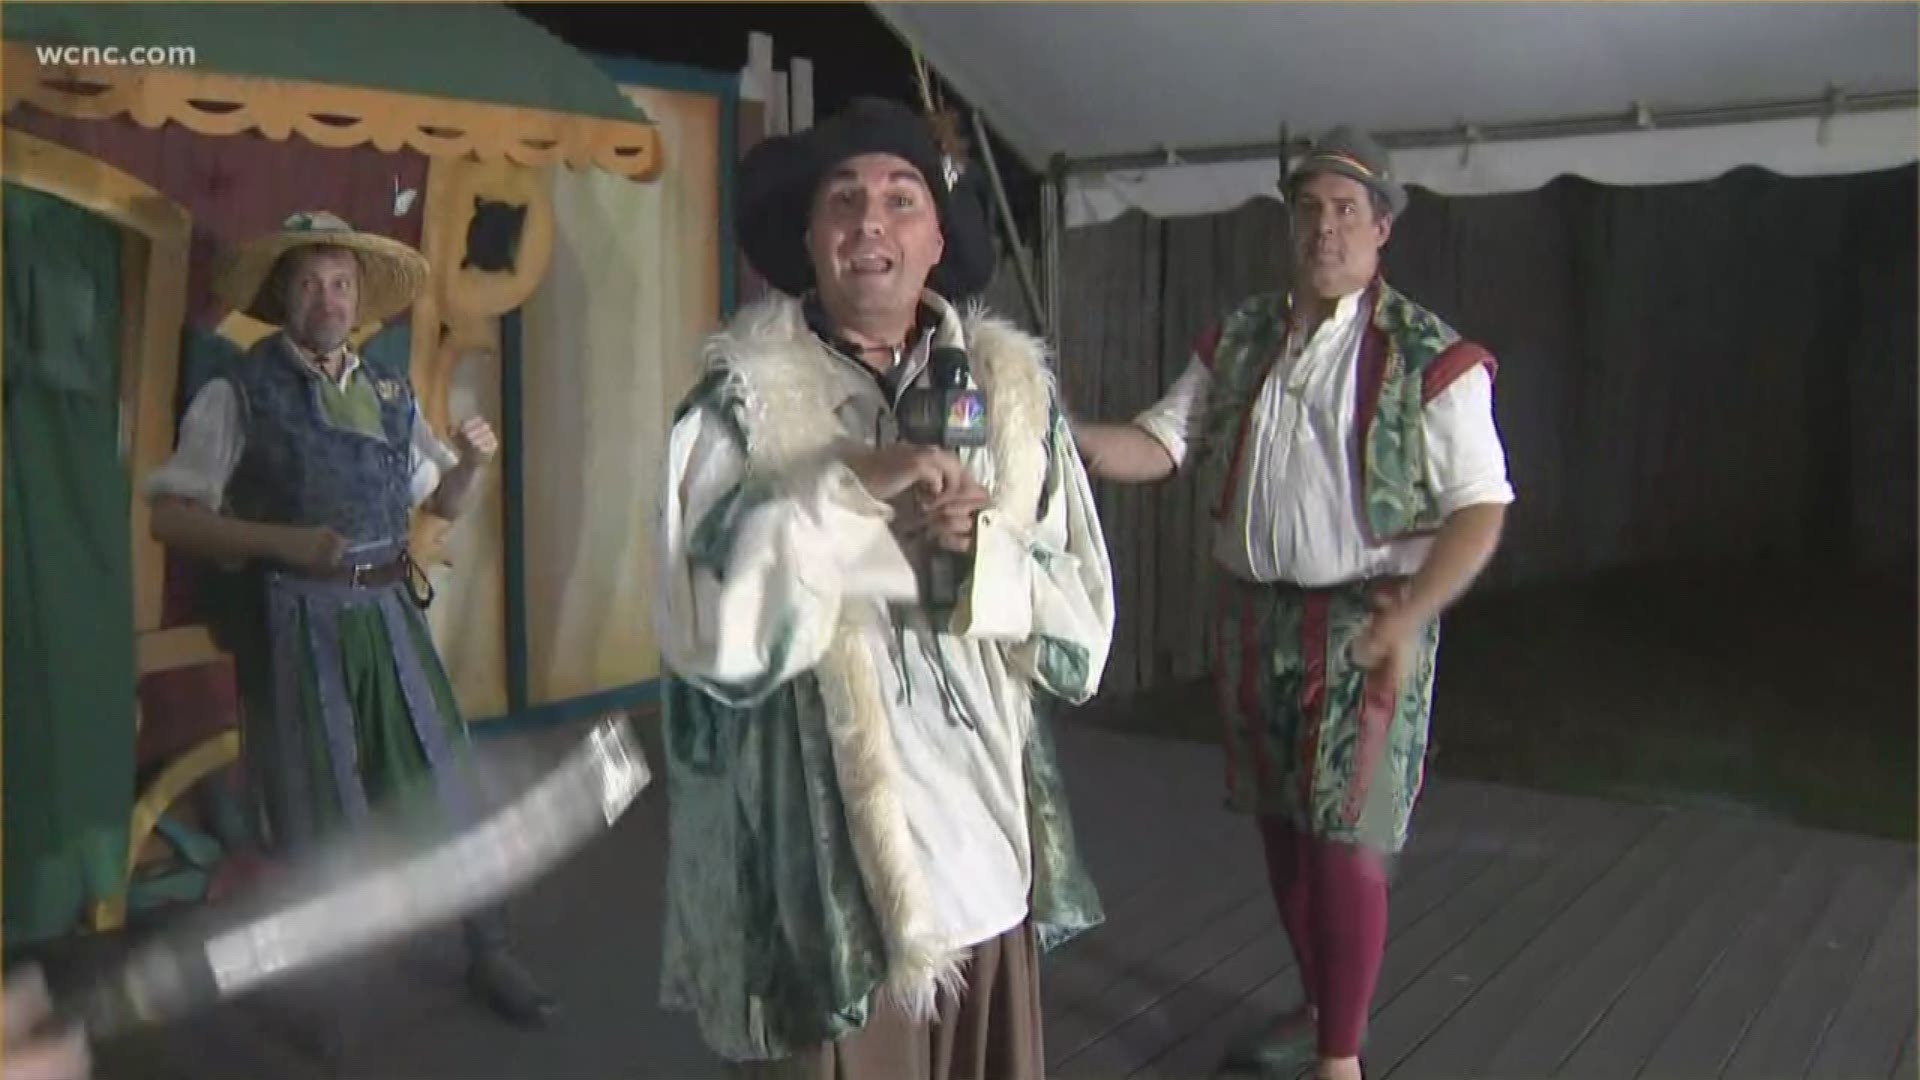 Opening weekend for Carolina Renaissance Festival is here! It features everything from entertainment to food and there's even sword juggling.